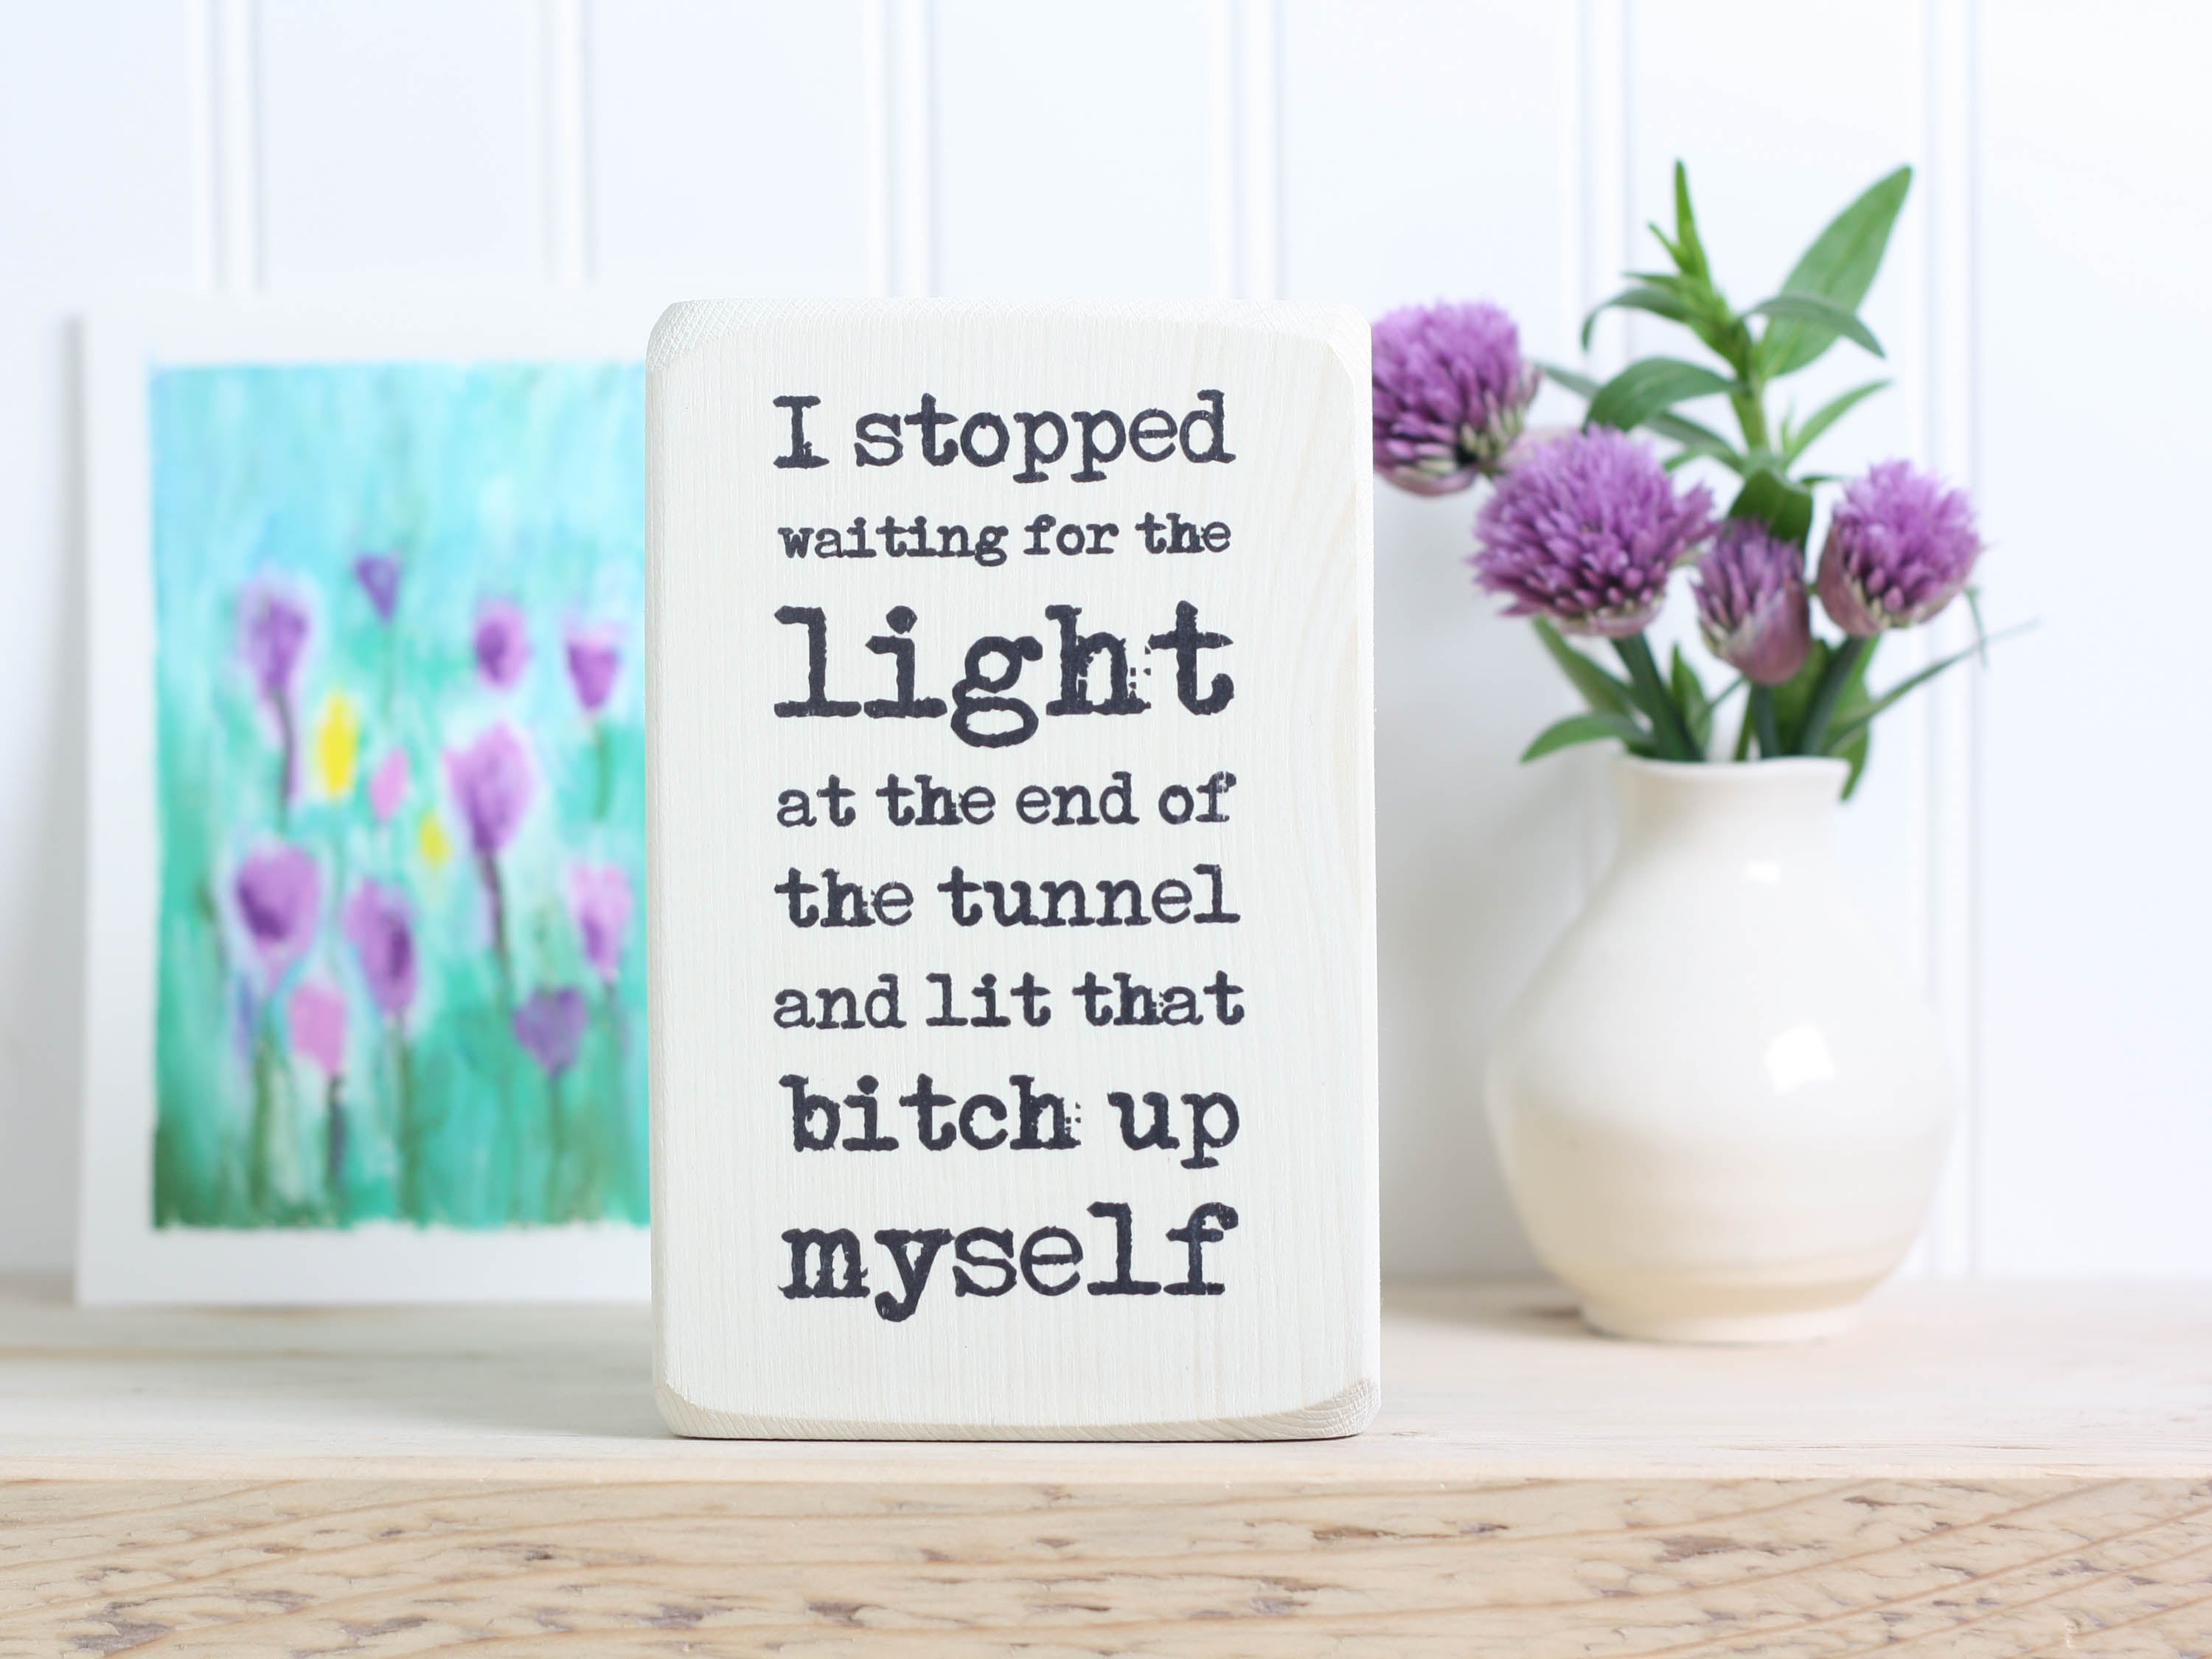 Small wood quote block in whitewash with the saying "I stopped waiting for the light at the end of the tunnel and lit that bitch up myself."